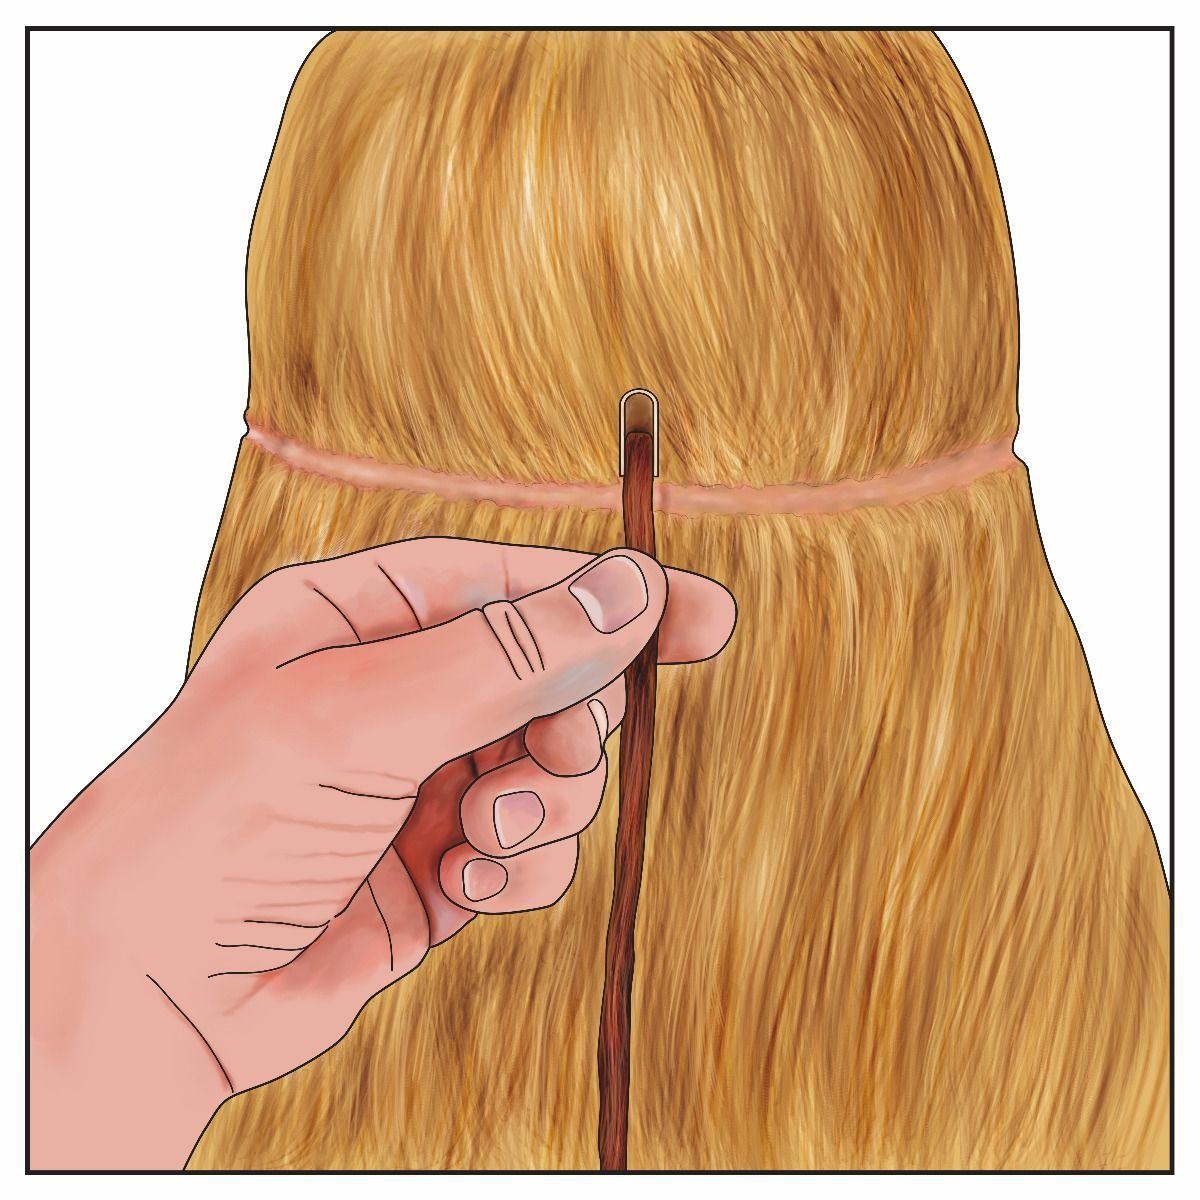 Fitting Guide for Bonding Extensions